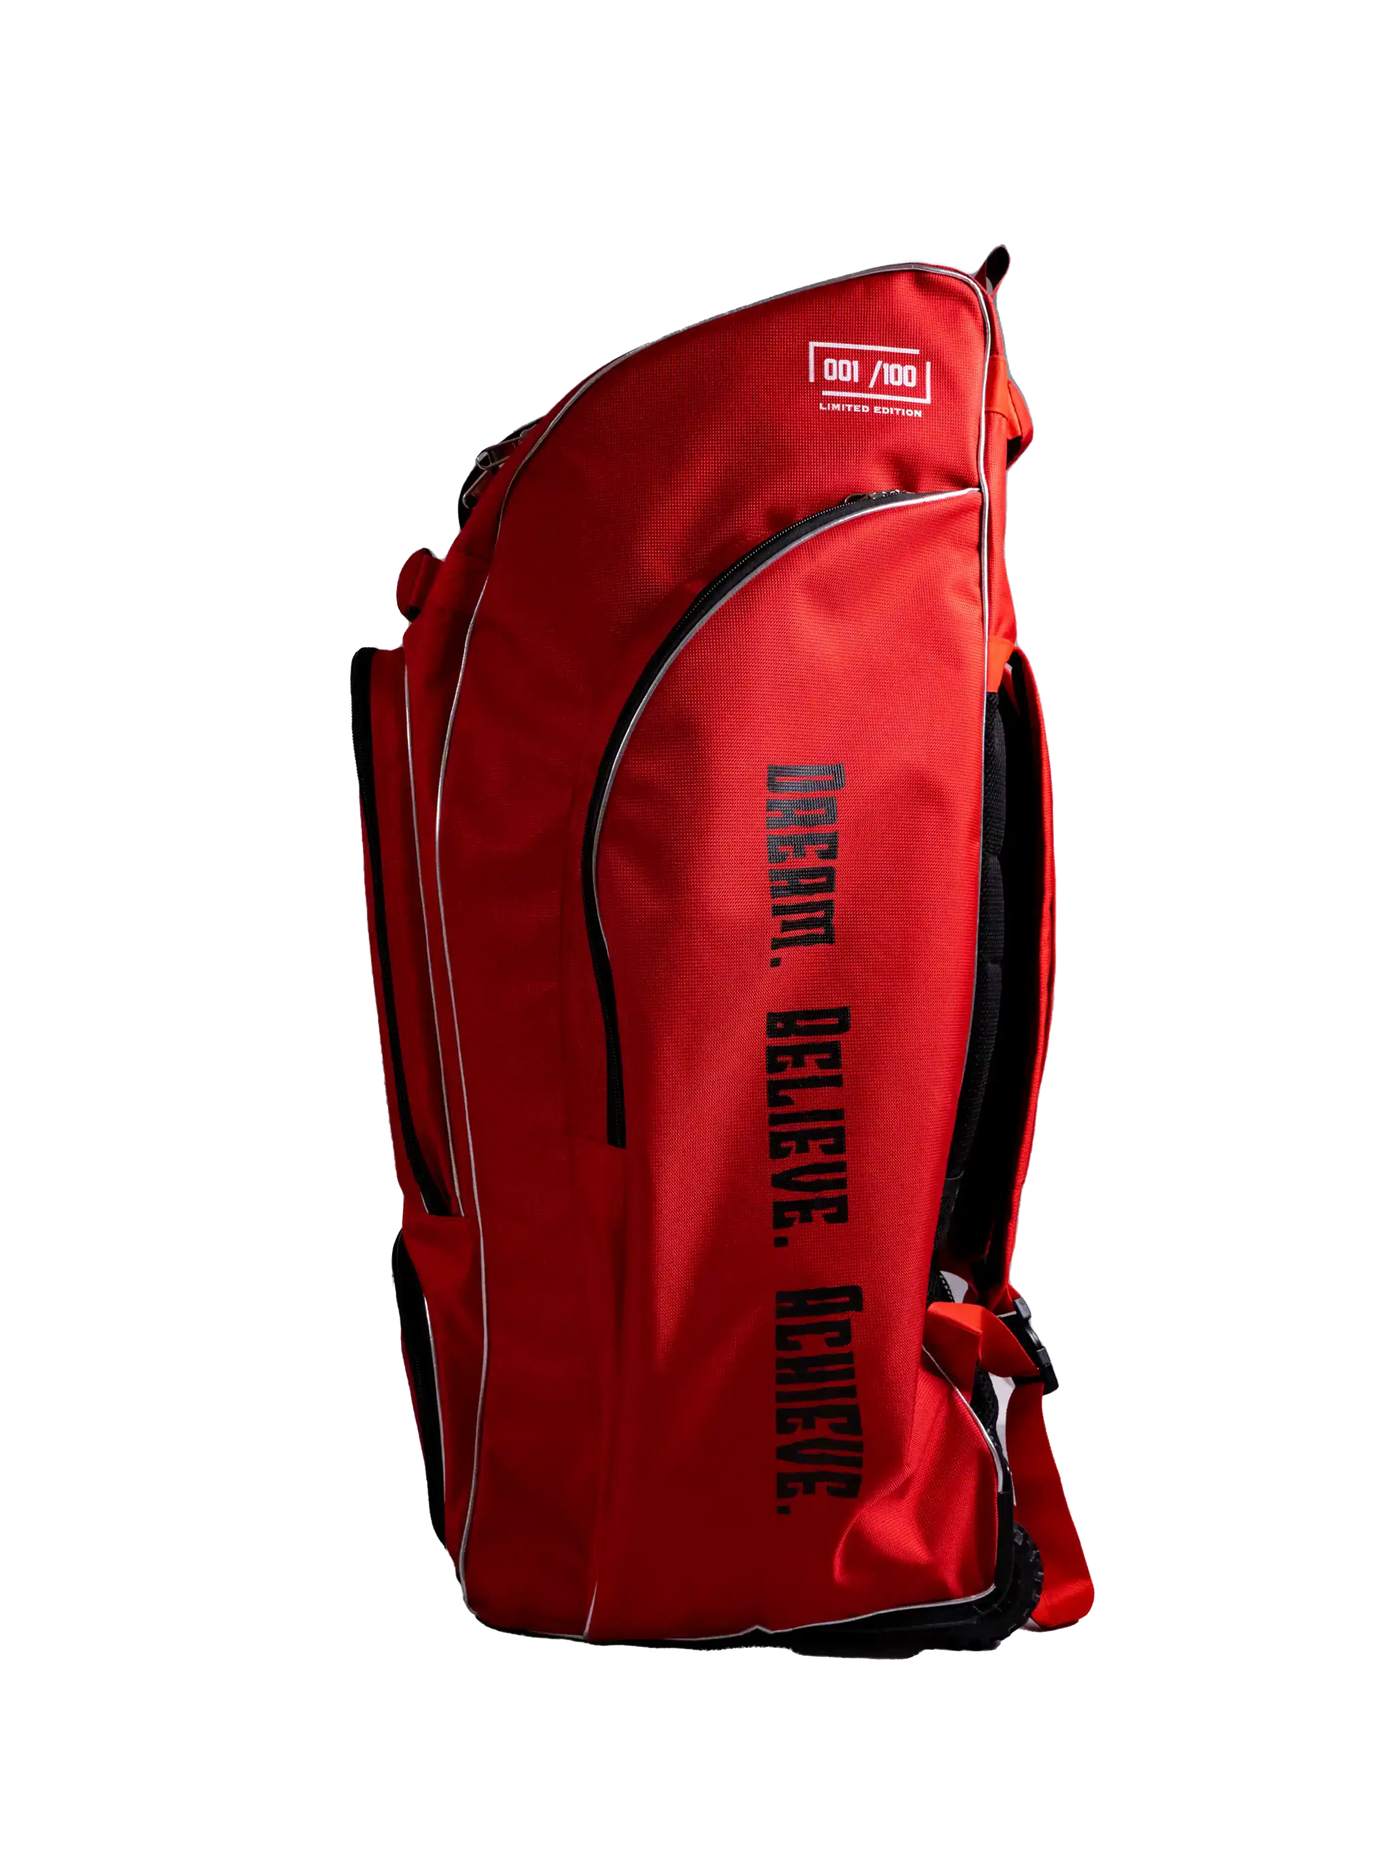 Verve Duffle Kit Bag - LE RED Livery